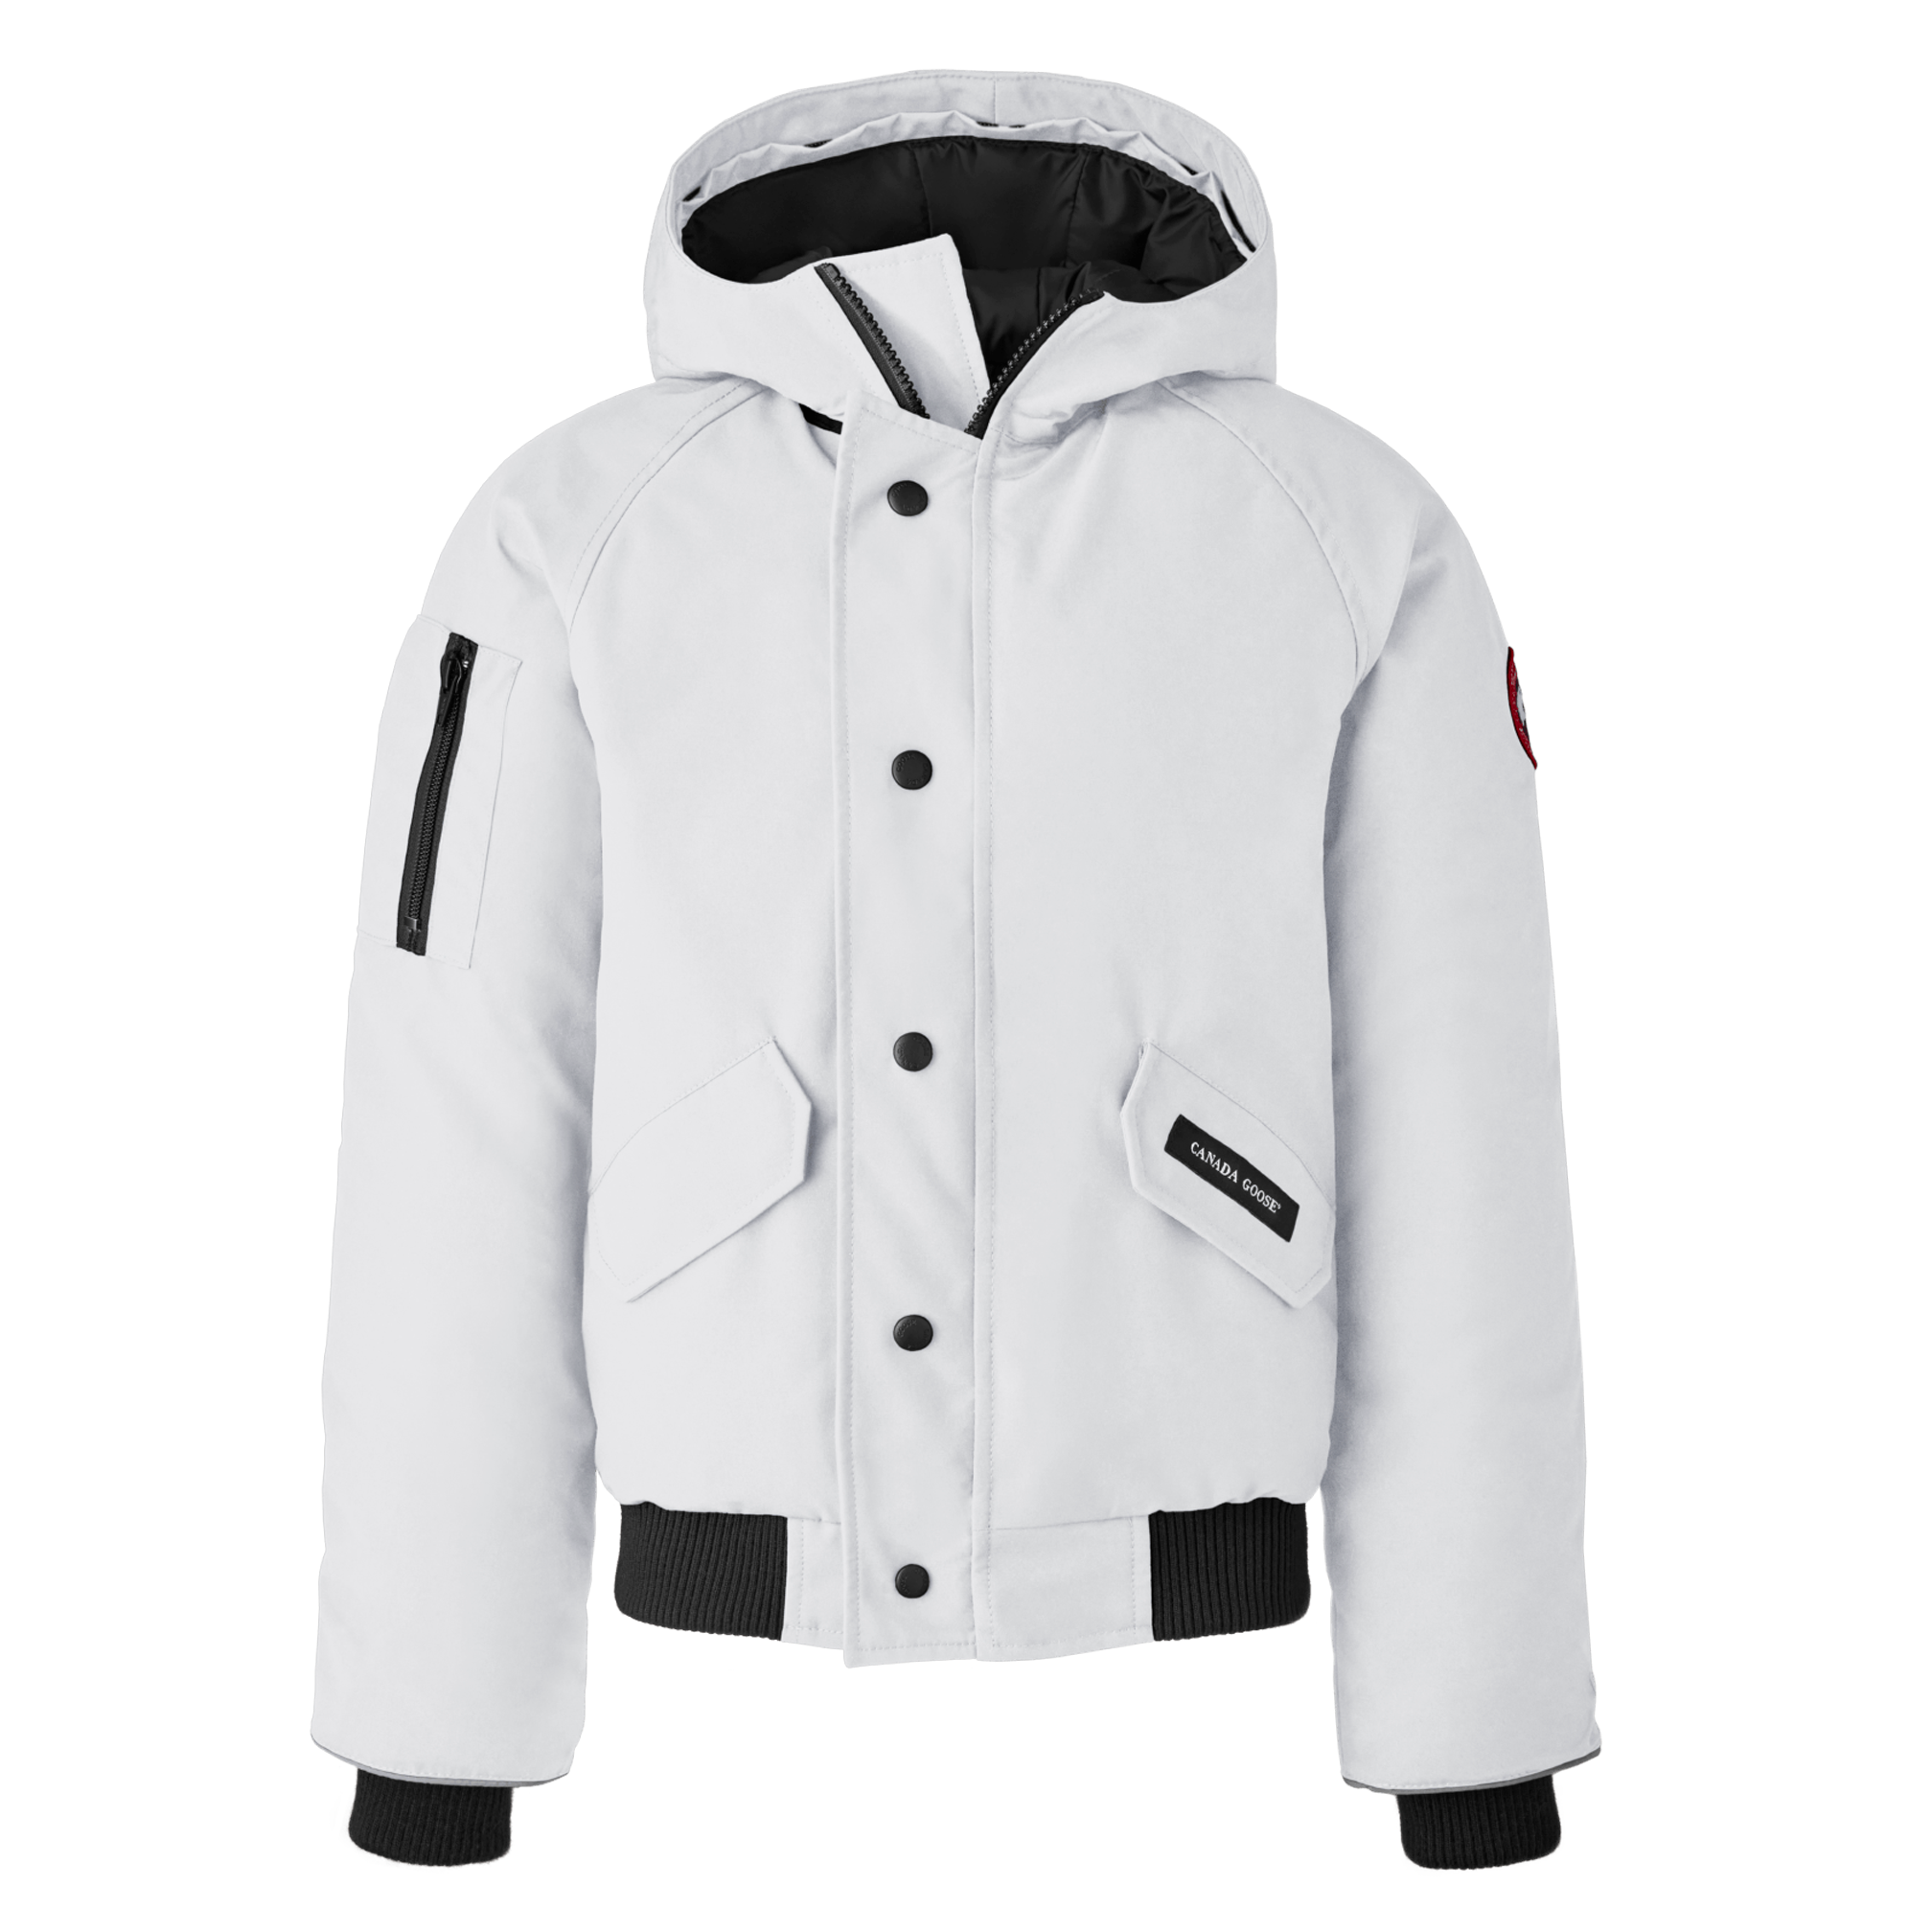 Canada Goose Rundle Bomber White with Fur